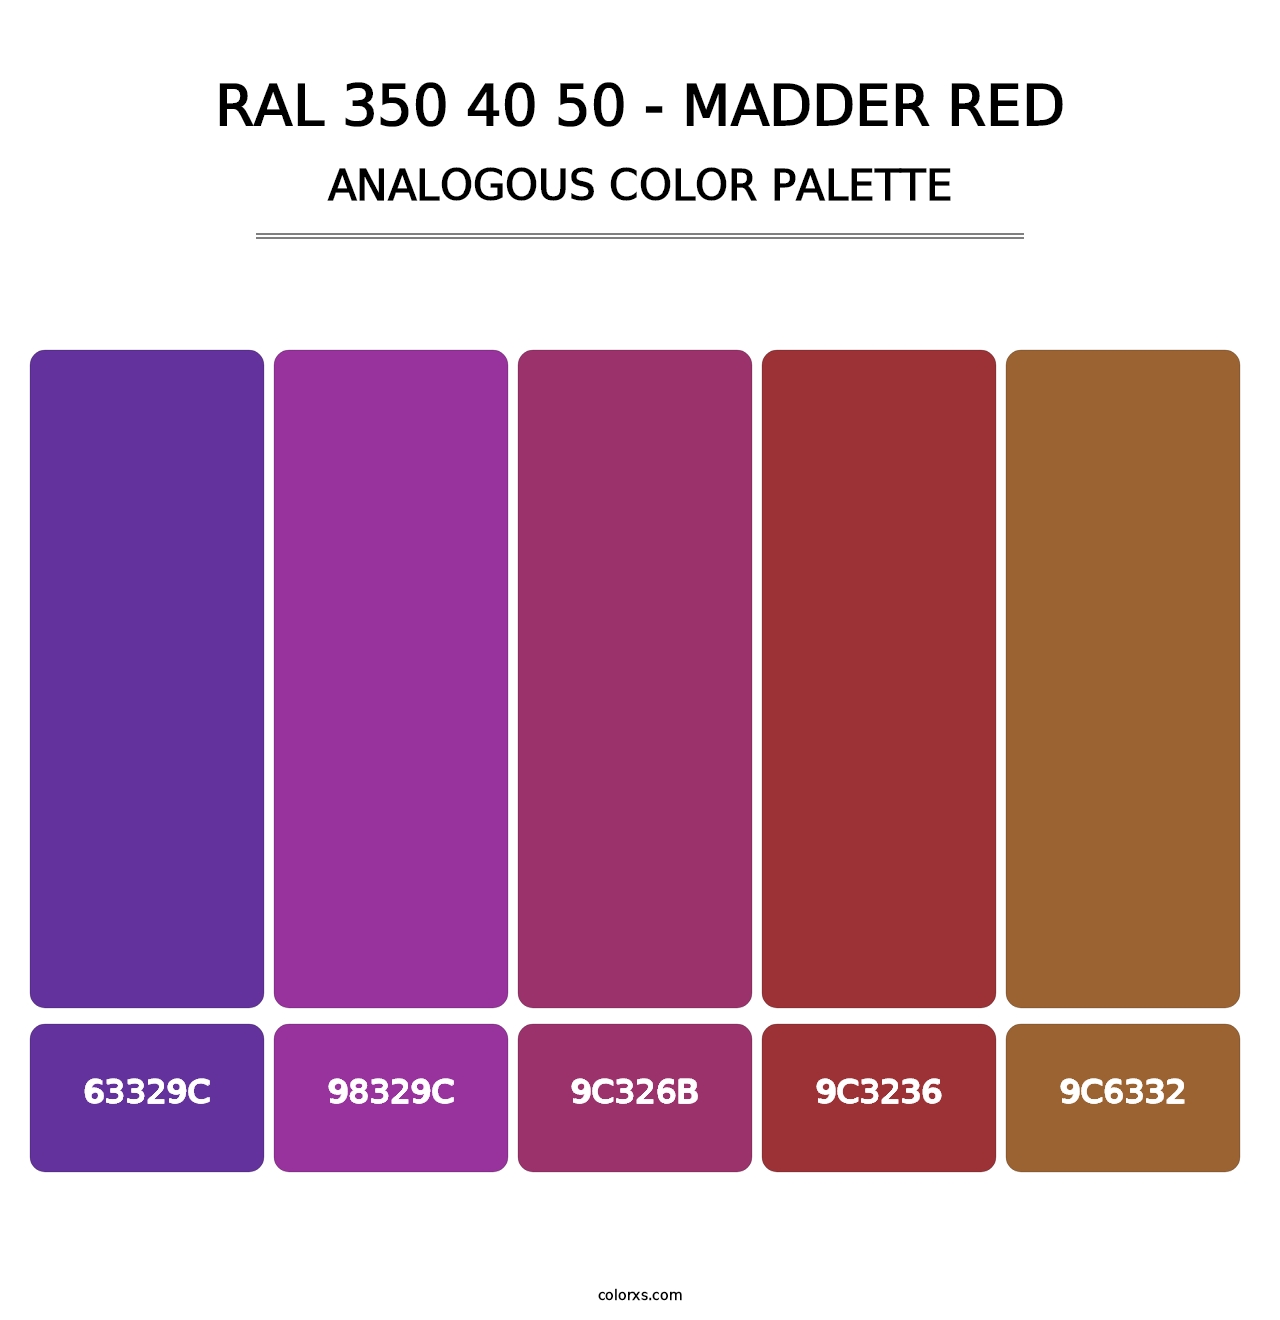 RAL 350 40 50 - Madder Red - Analogous Color Palette